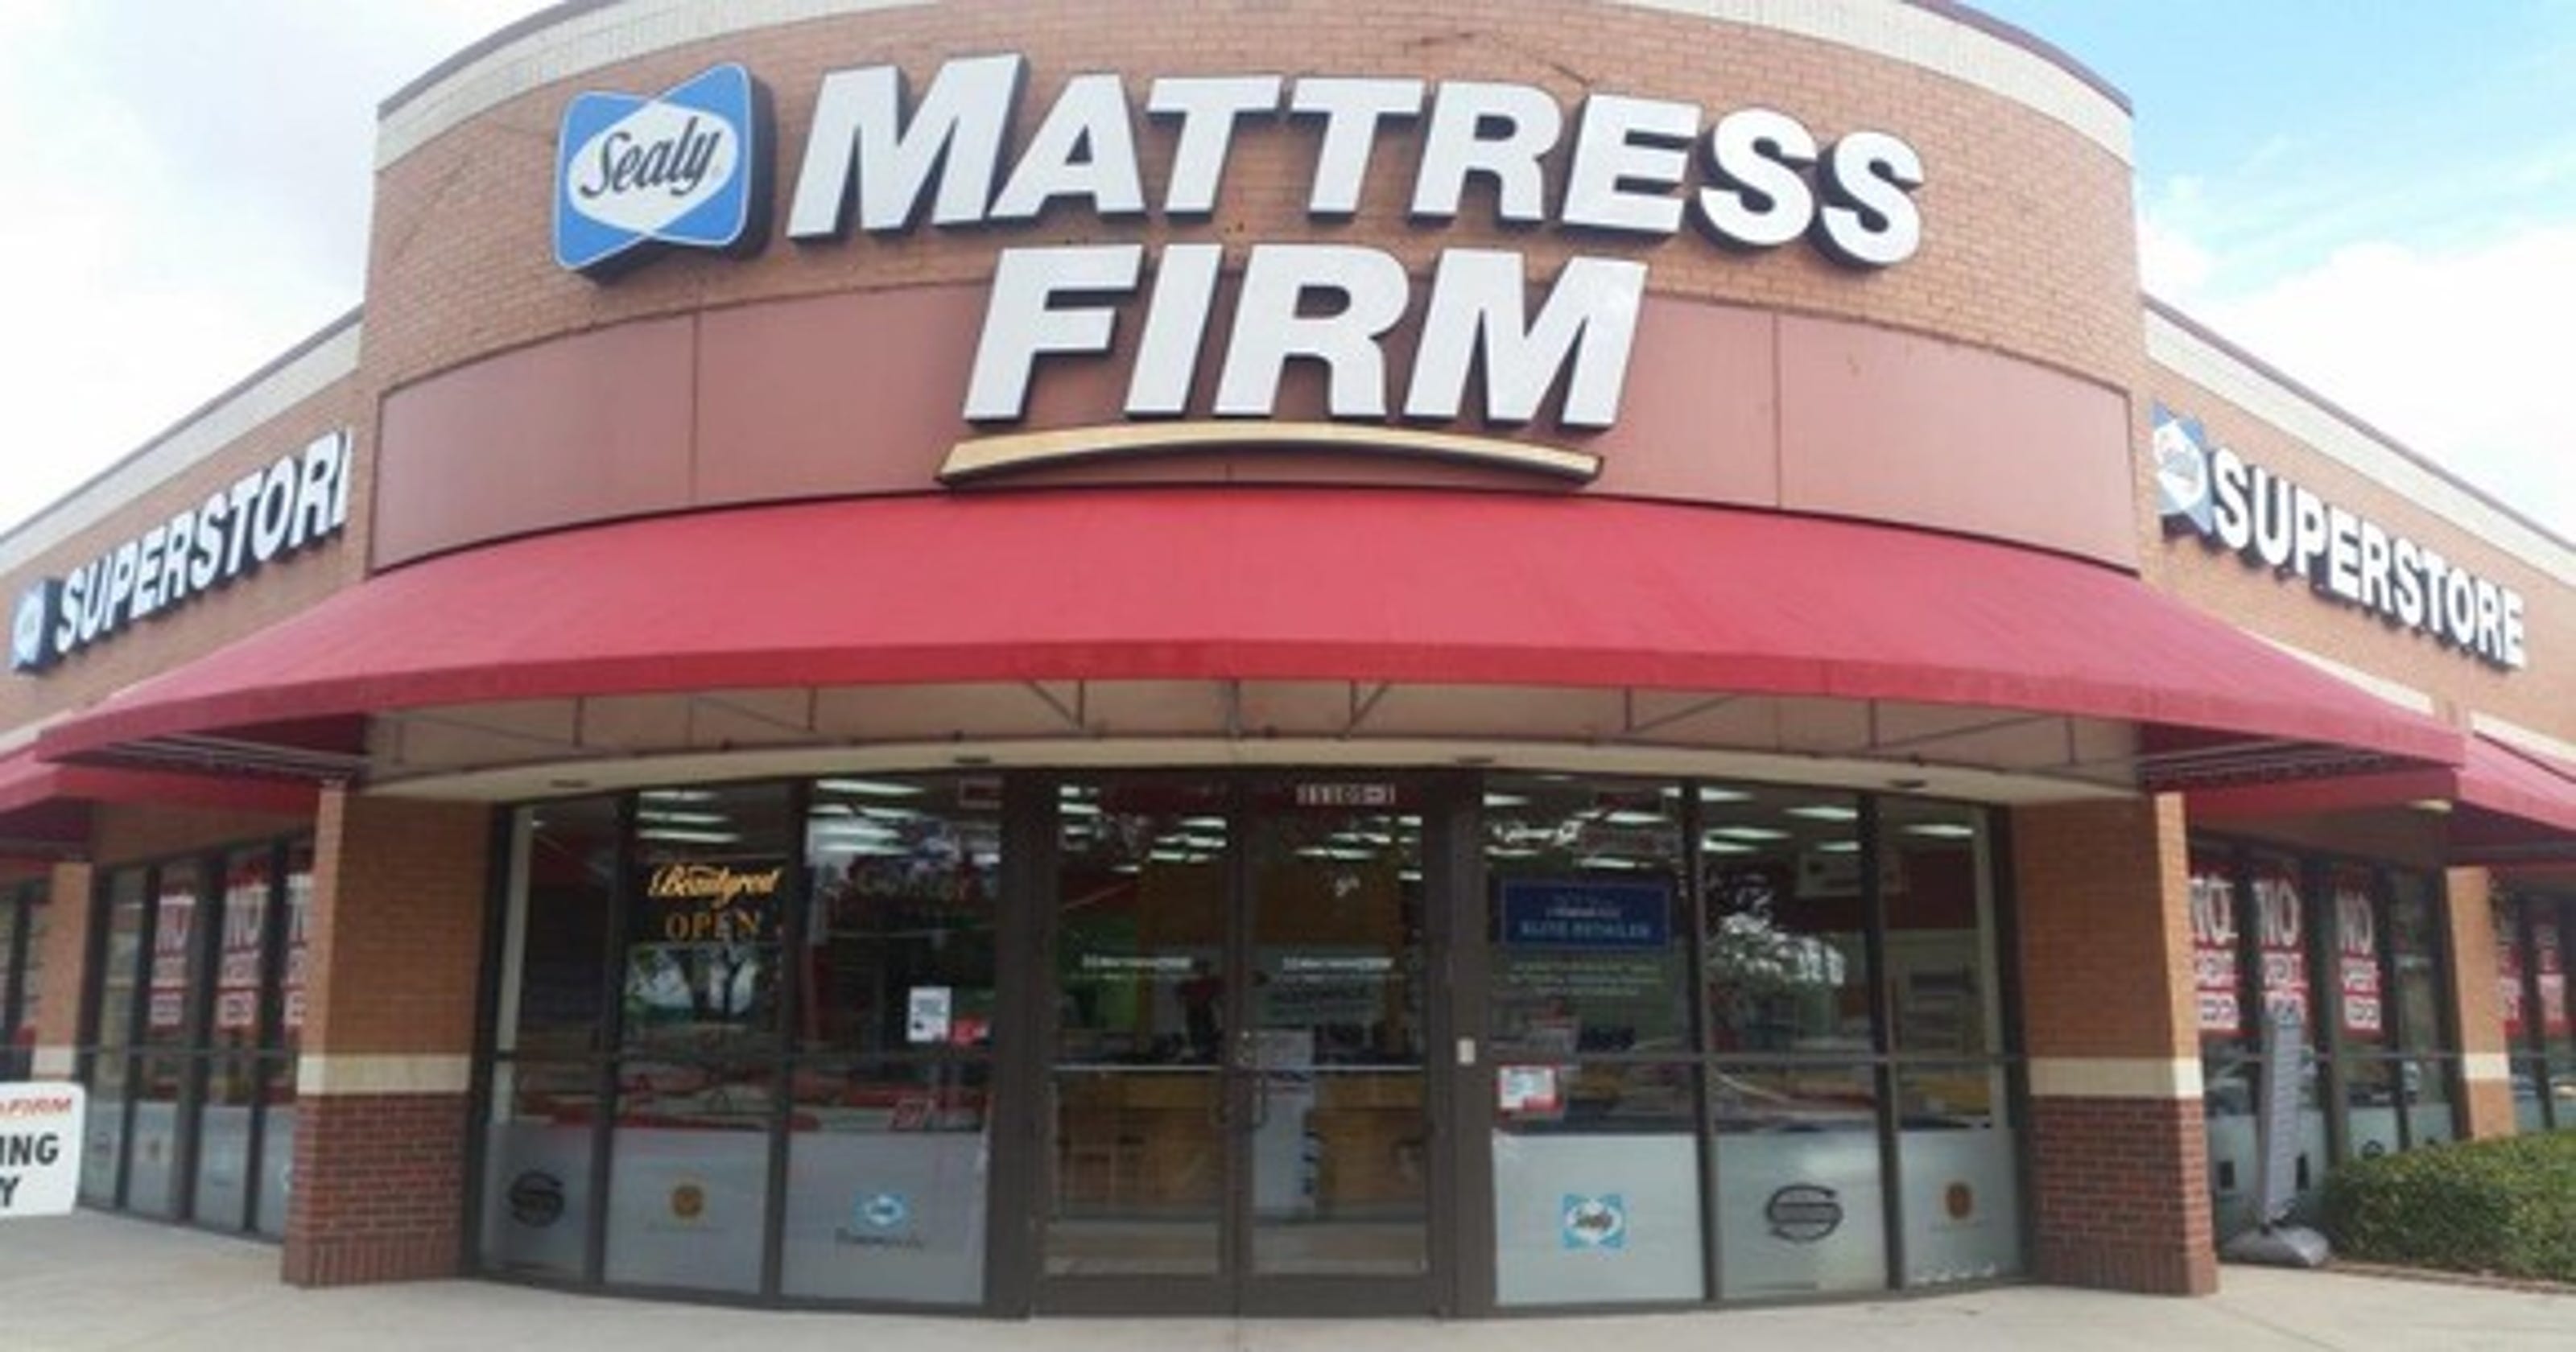 mattress firms in the area